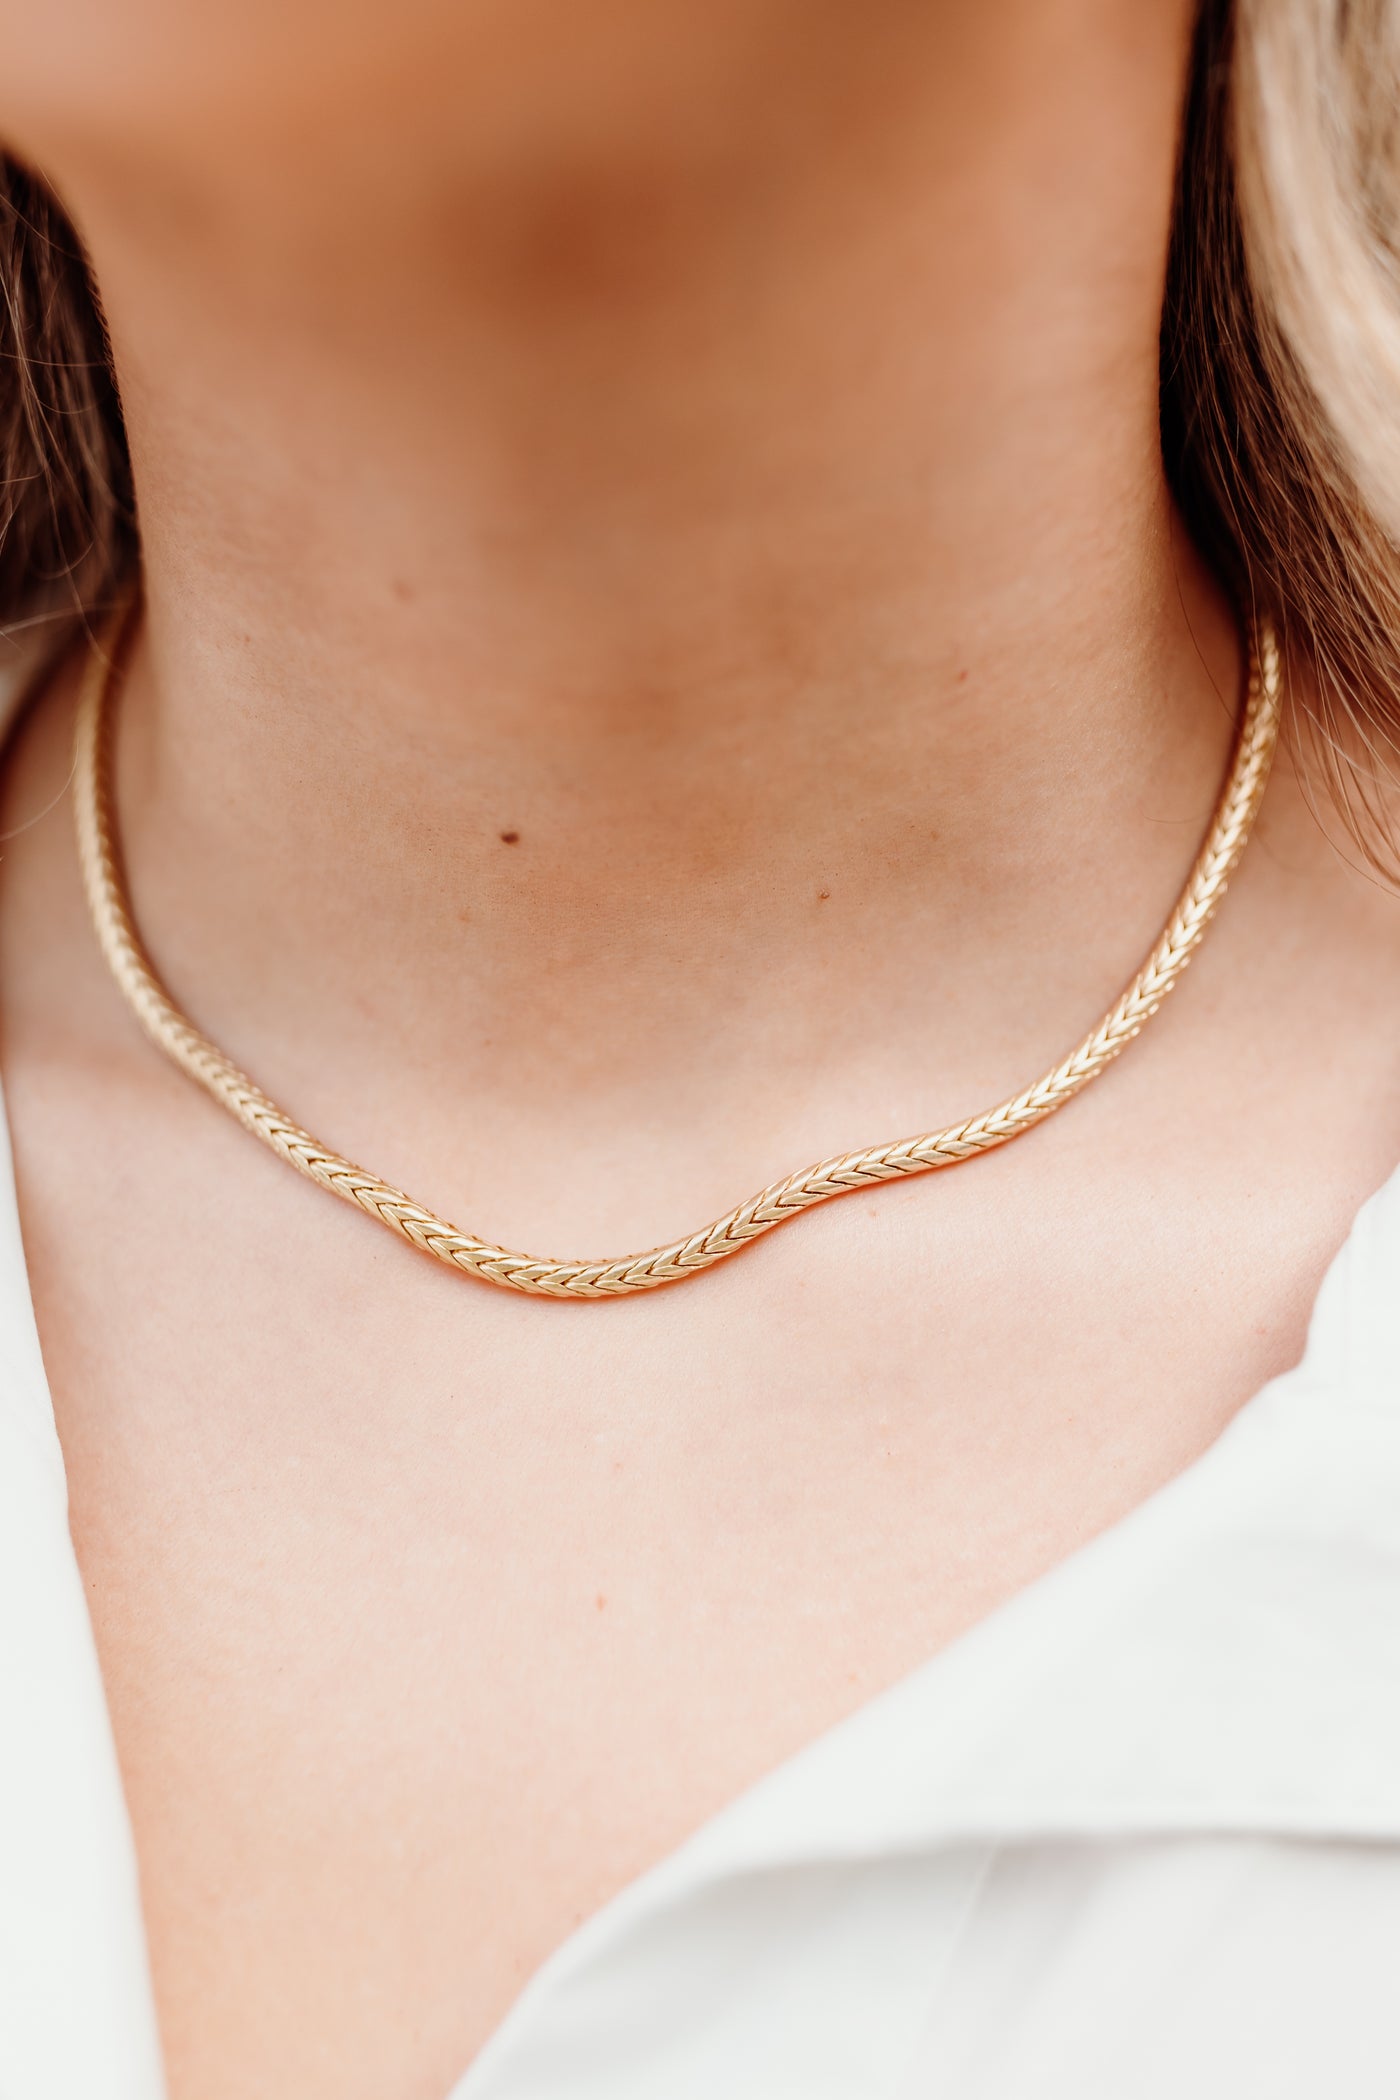 Virtue Jewelry Gold Python Chain Necklace